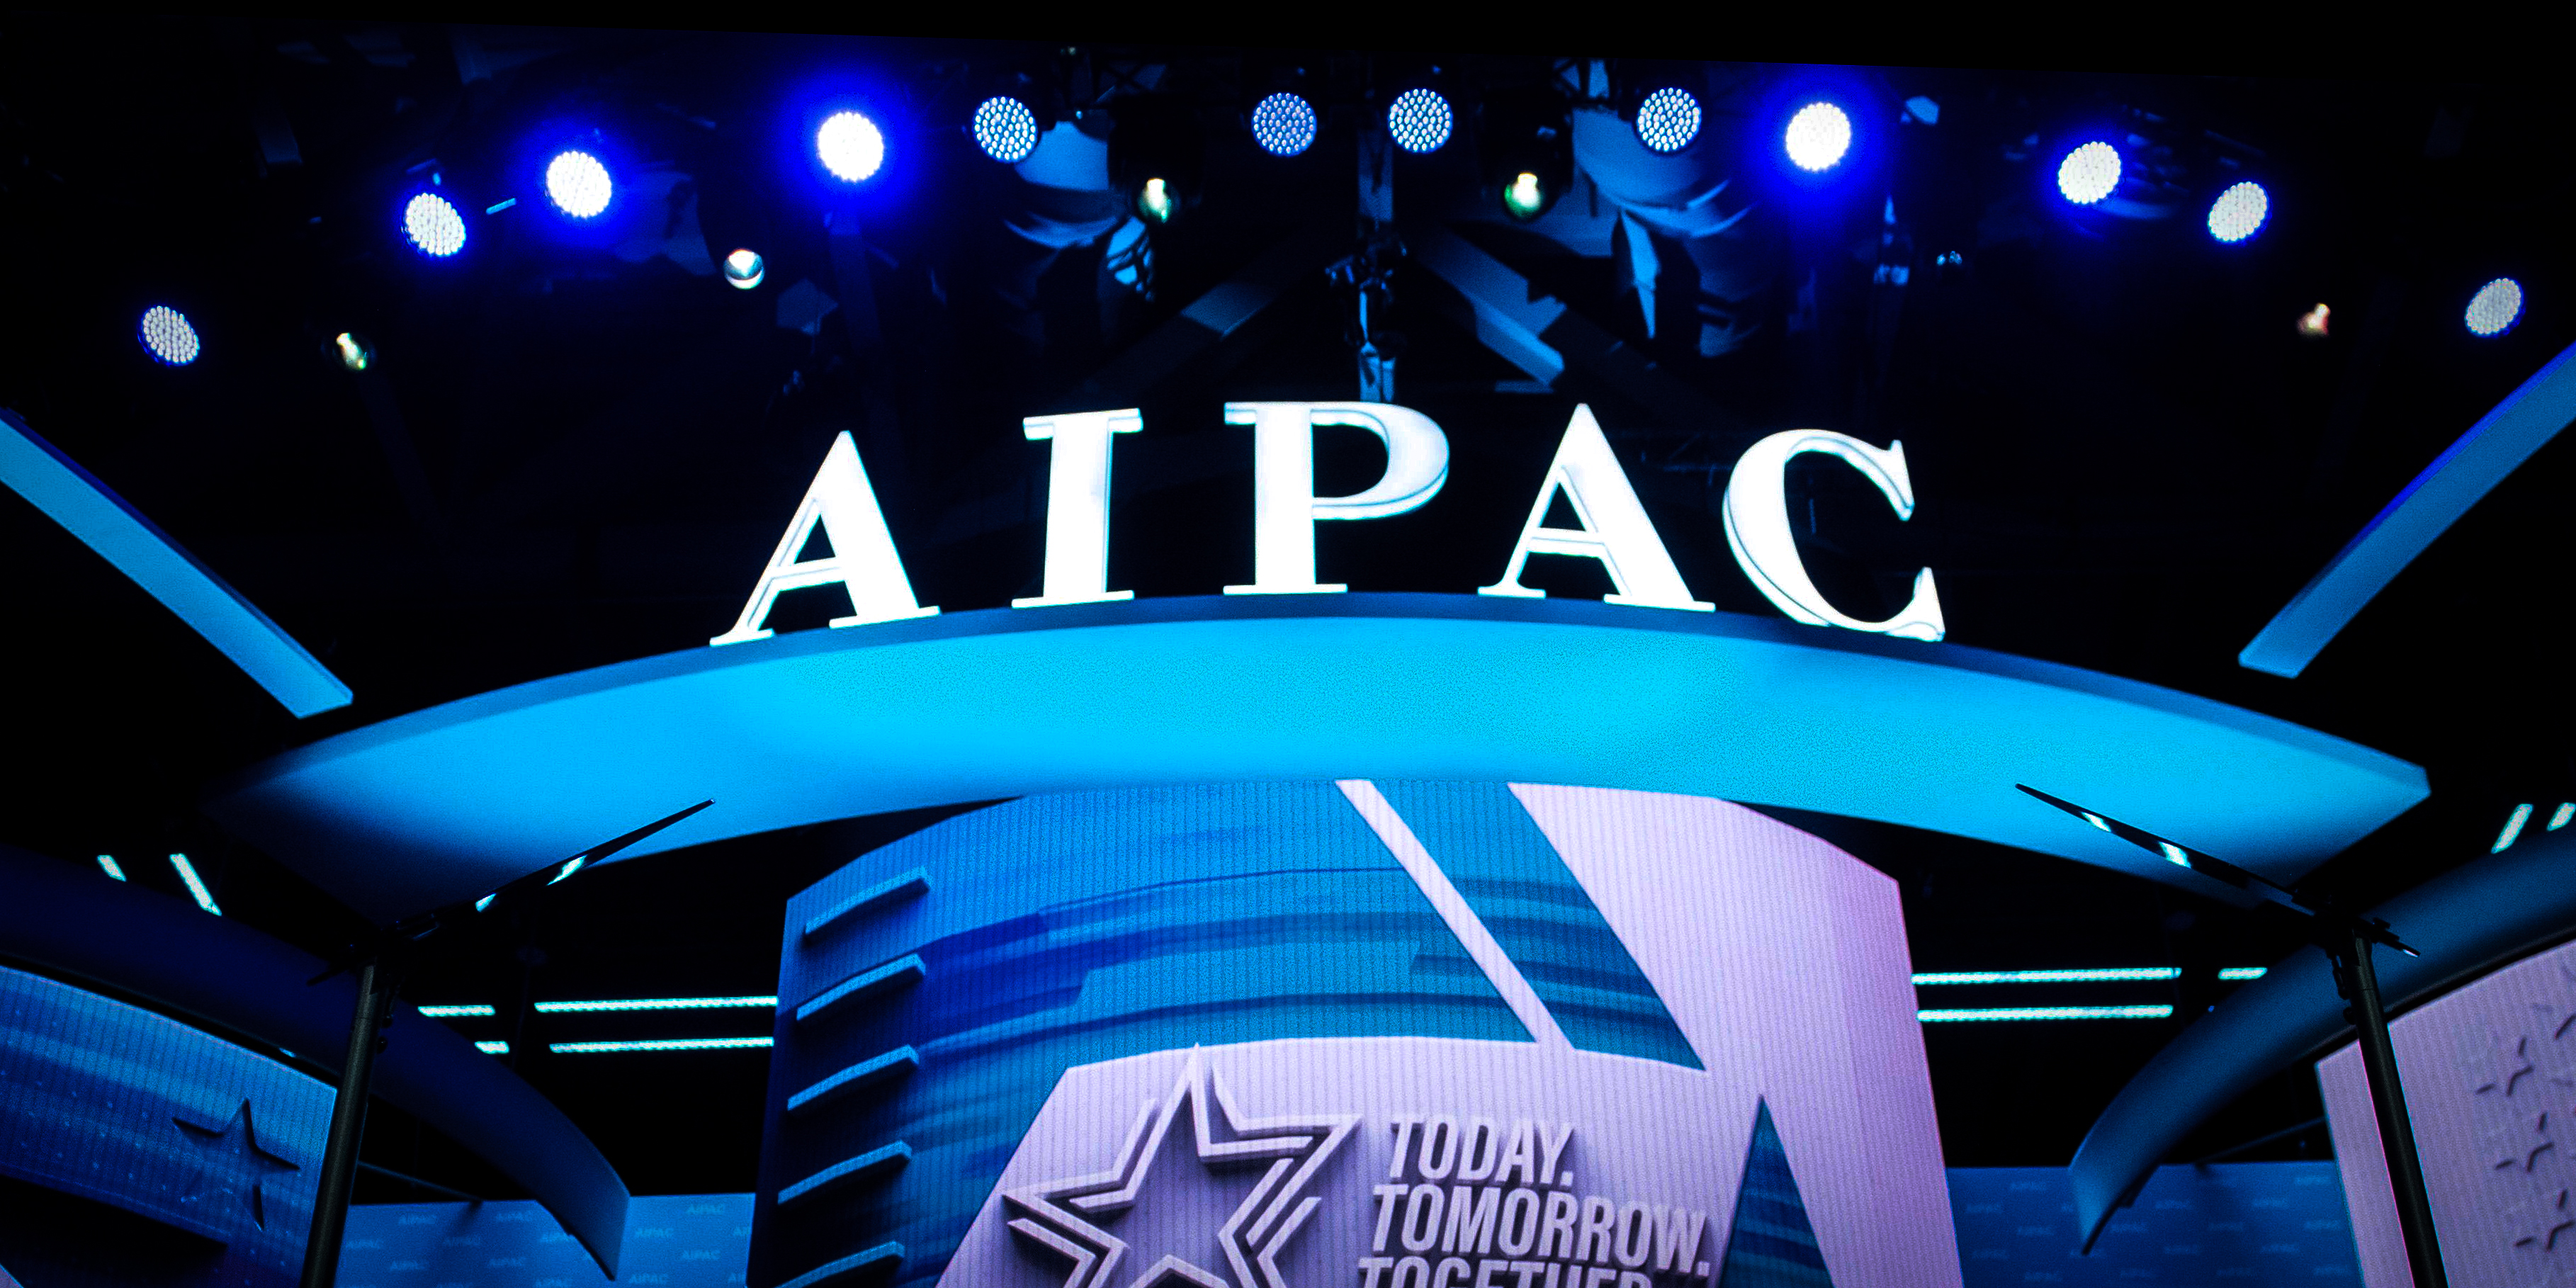 US Vice President Mike Pence speaks during the American Israel Public Affairs Committee (AIPAC) 2020 Policy Conference in Washington, DC, March 2, 2020. (Photo by SAUL LOEB / AFP) (Photo by SAUL LOEB/AFP via Getty Images)